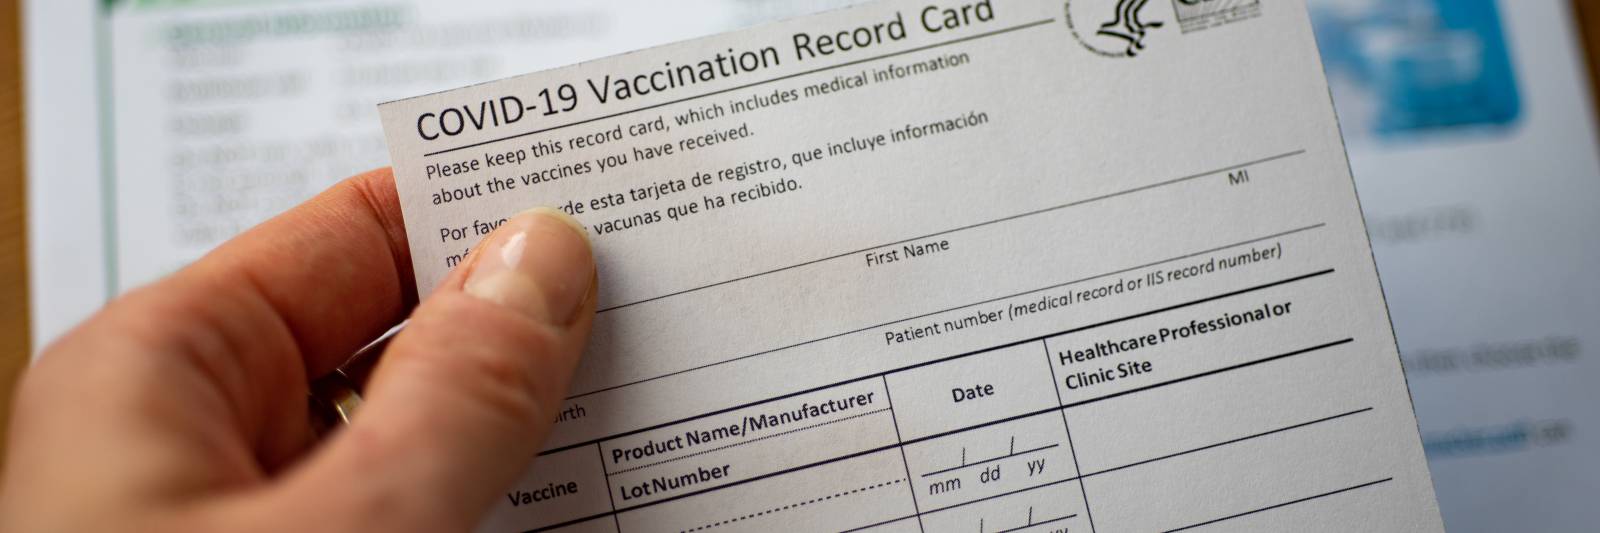 fake covid vaccination certificates available on the dark web